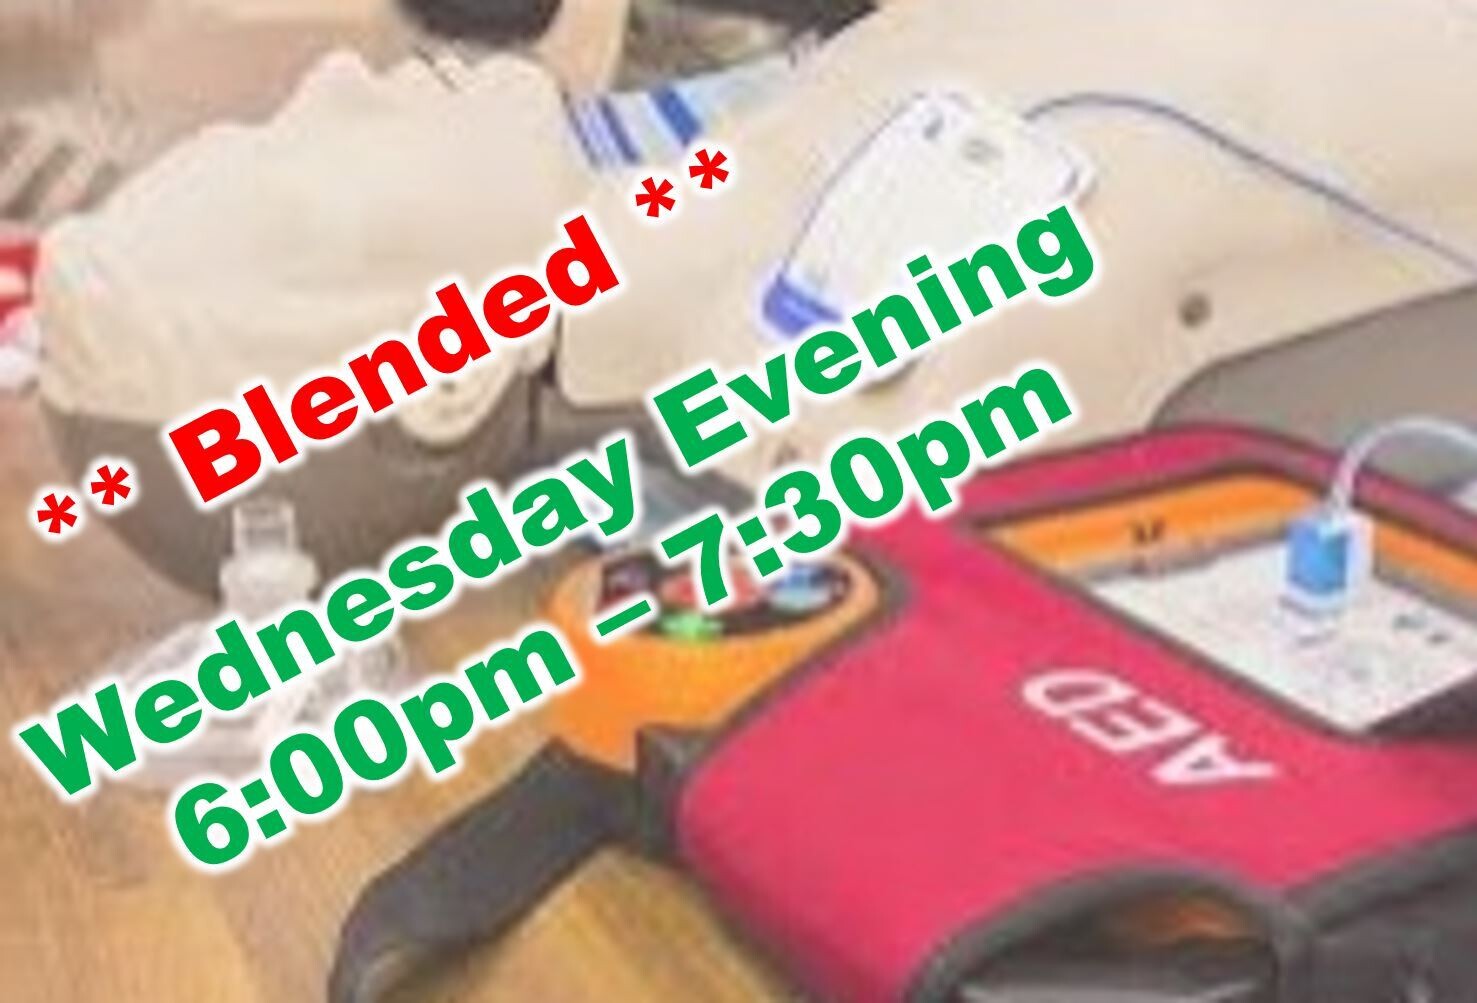 Mar. 2nd, 2022 (Wednesday) 6:00pm-7:30pm CPR Class